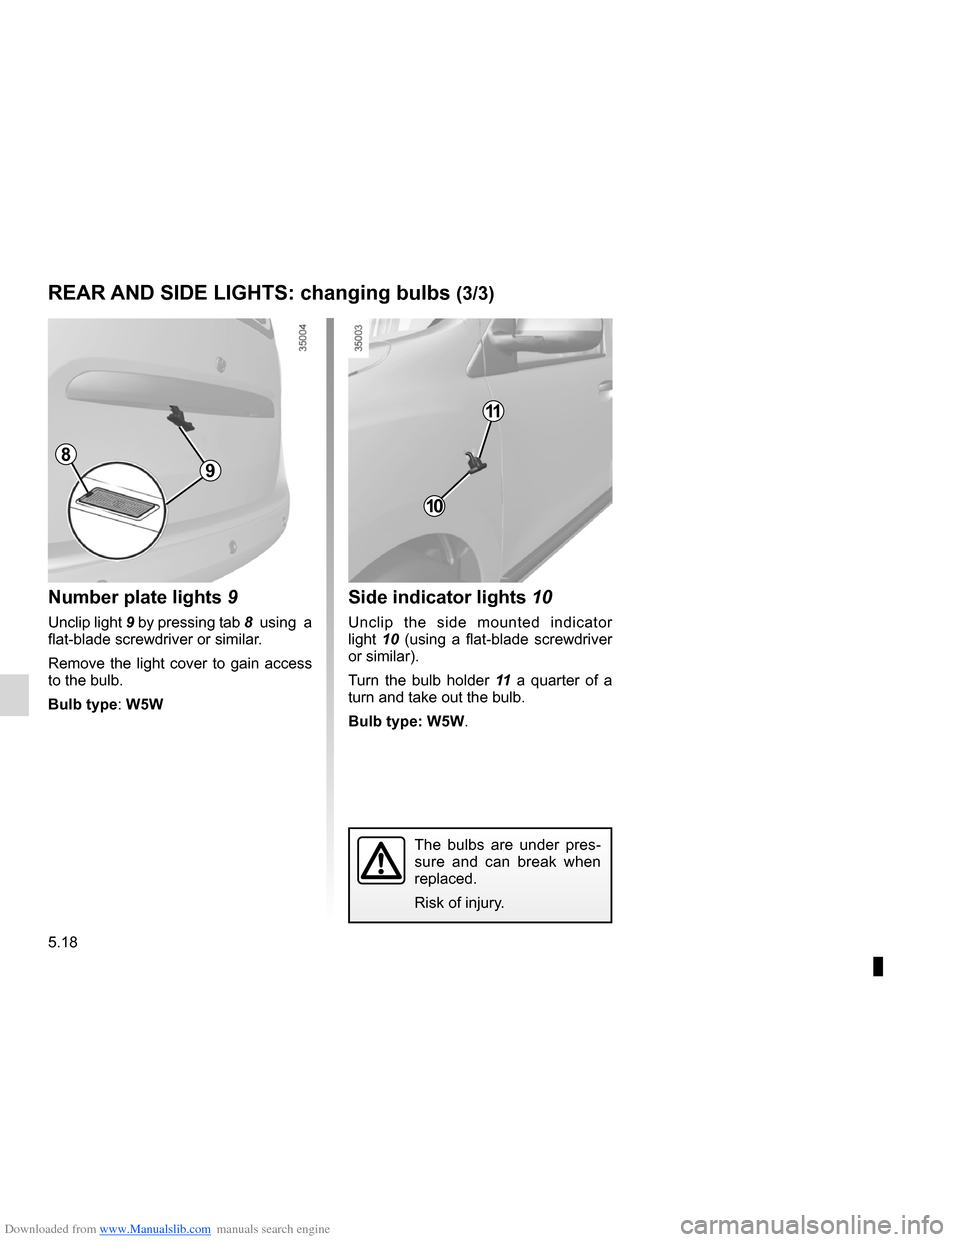 DACIA LODGY 2012 1.G Owners Manual Downloaded from www.Manualslib.com manuals search engine lights:reversing lights  ................................................. (current page)
side indicator lights changing bulbs  ...............